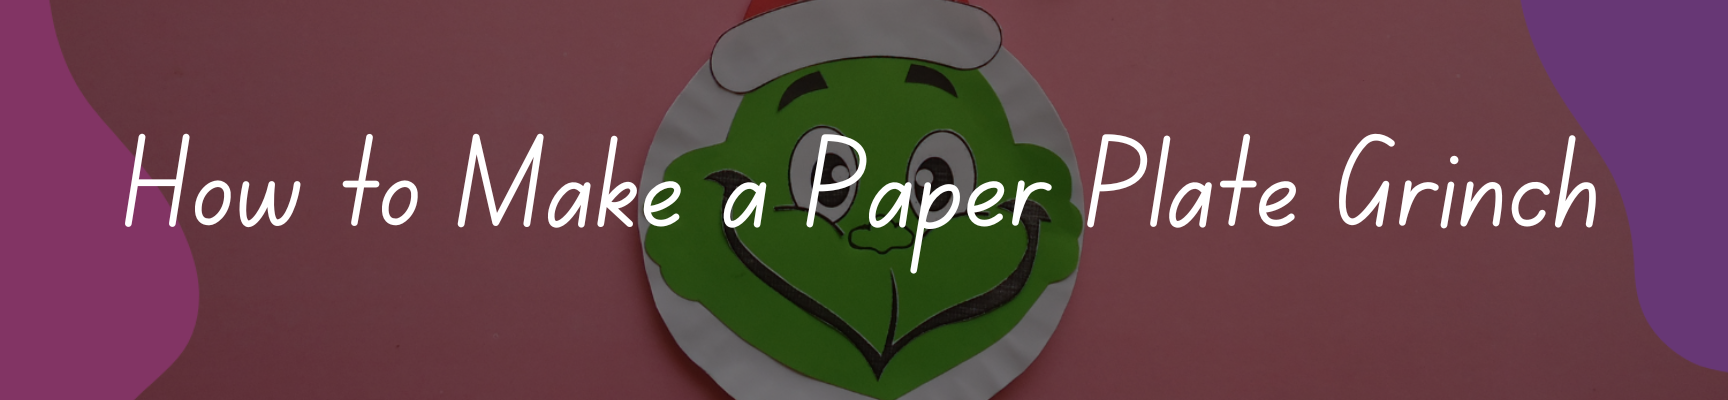 How to Make a Paper Plate Grinch